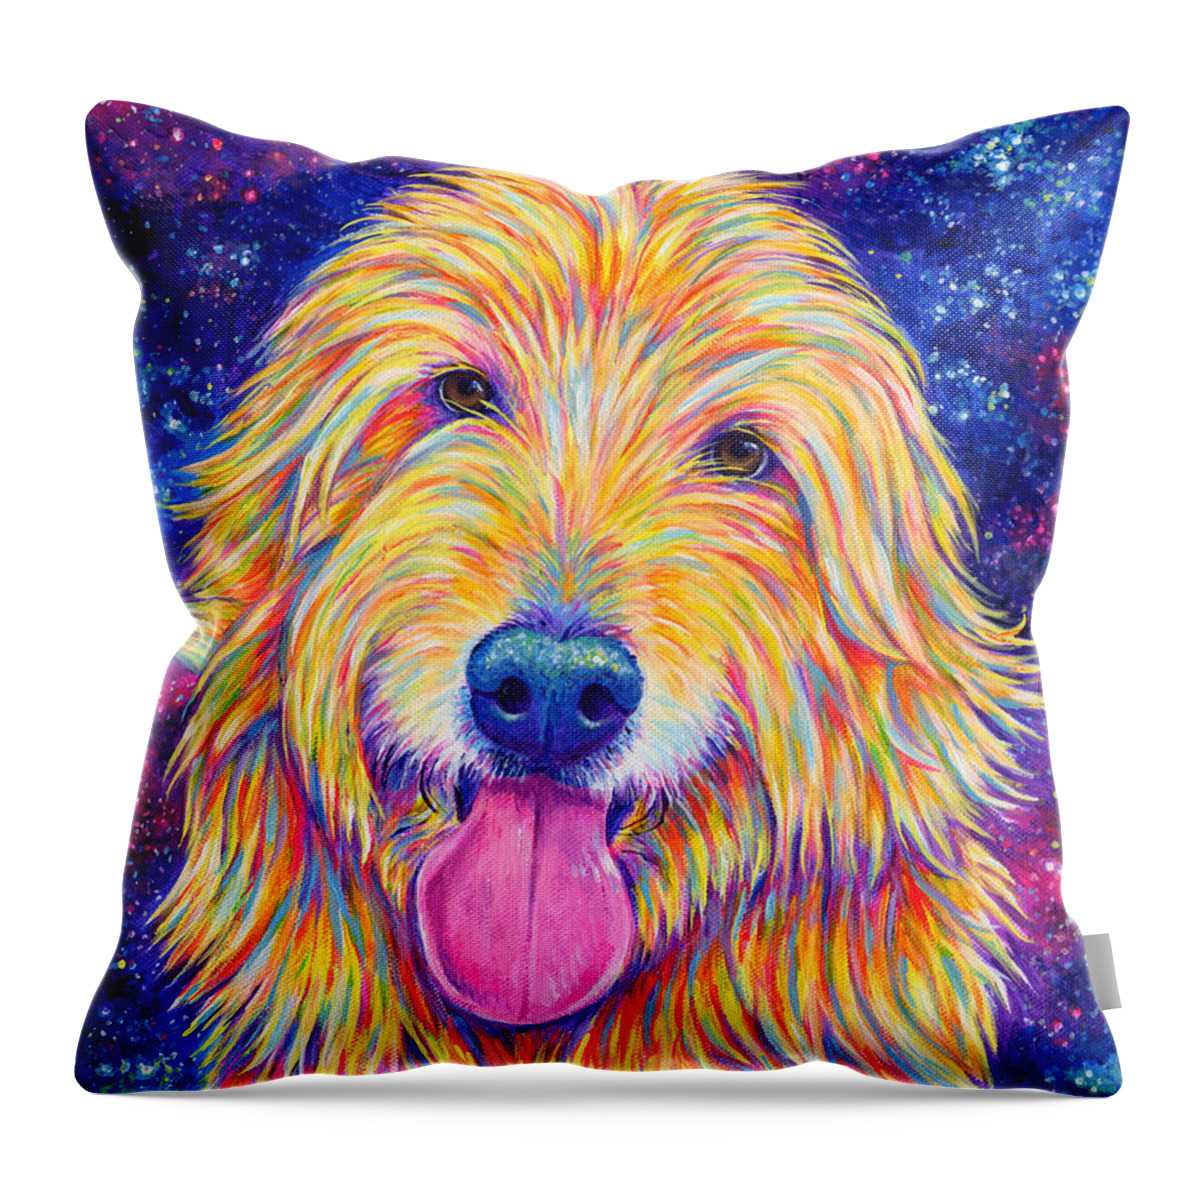 Goldendoodle Throw Pillow featuring the painting Colorful Rainbow Goldendoodle by Rebecca Wang